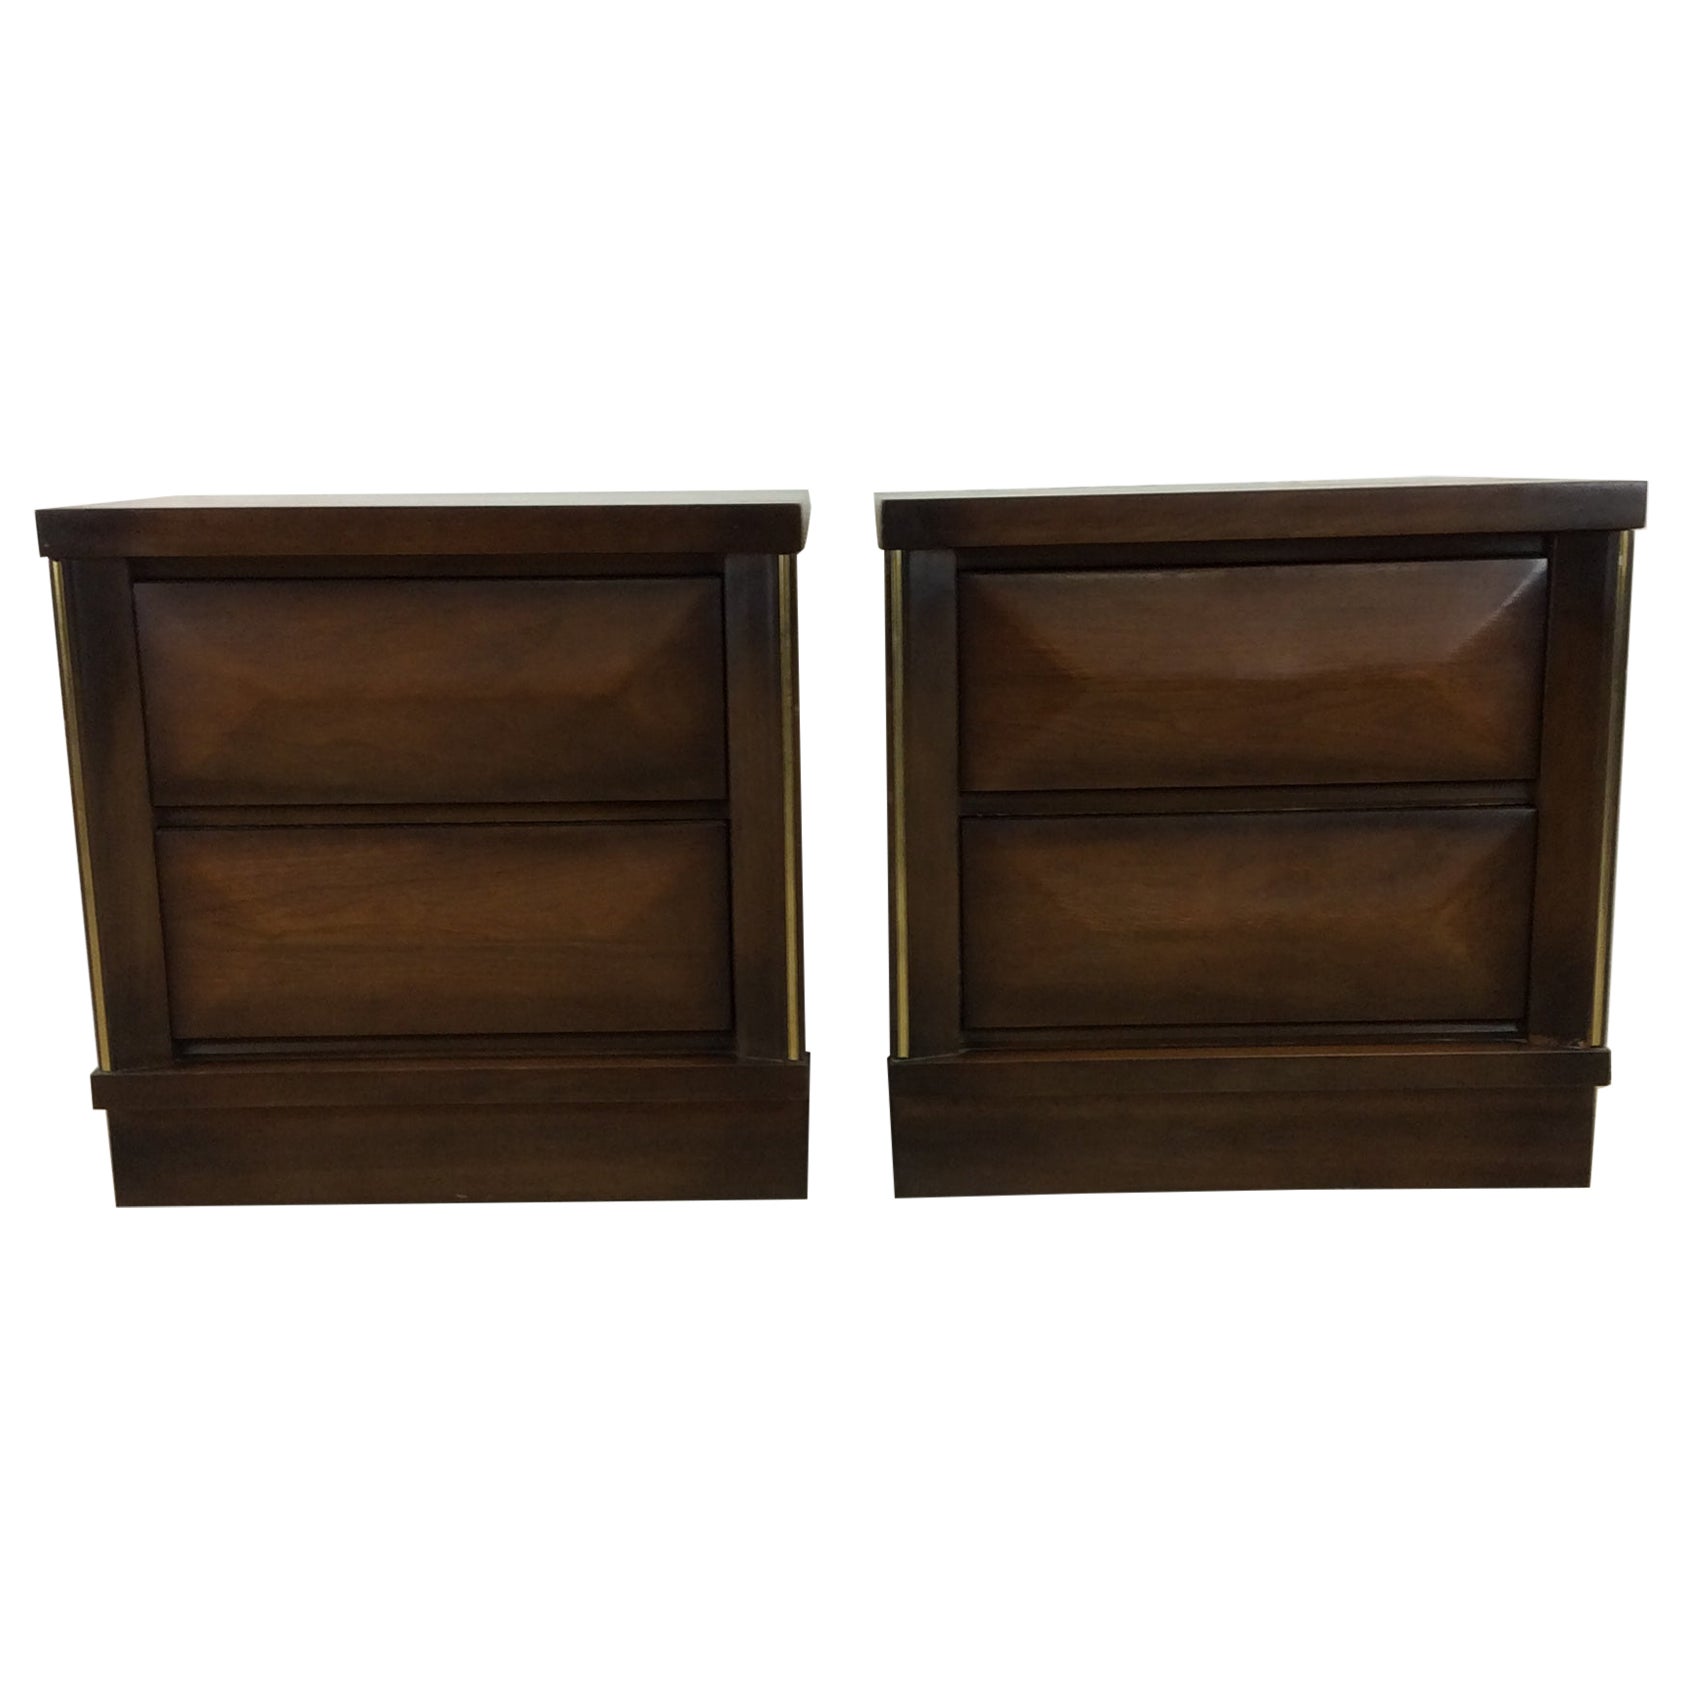 Pair of Mid-Century Modern Two Drawer Nightstands with Beveled Drawer Faces